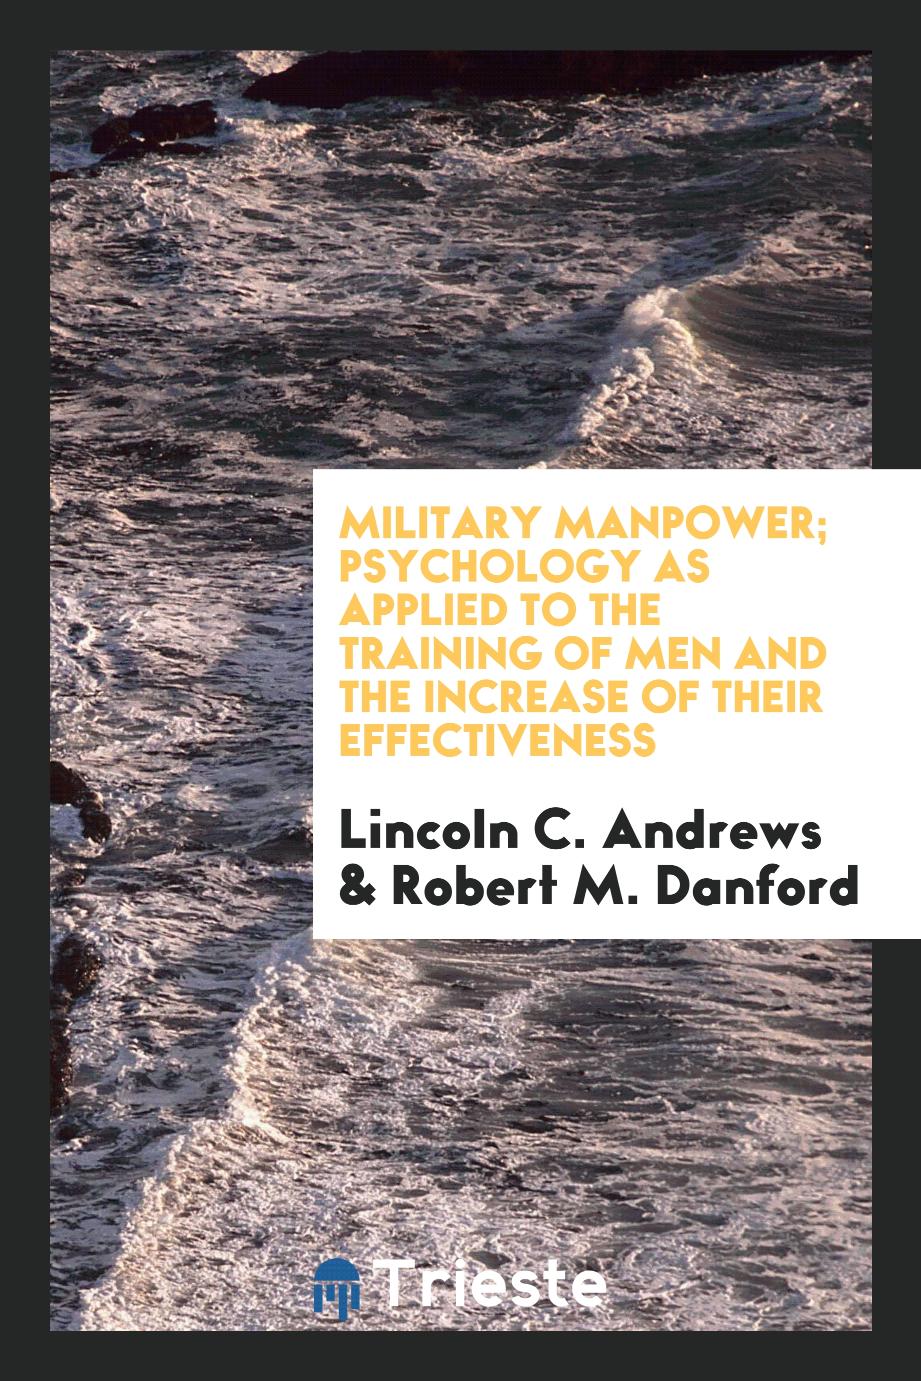 Military manpower; psychology as applied to the training of men and the increase of their effectiveness